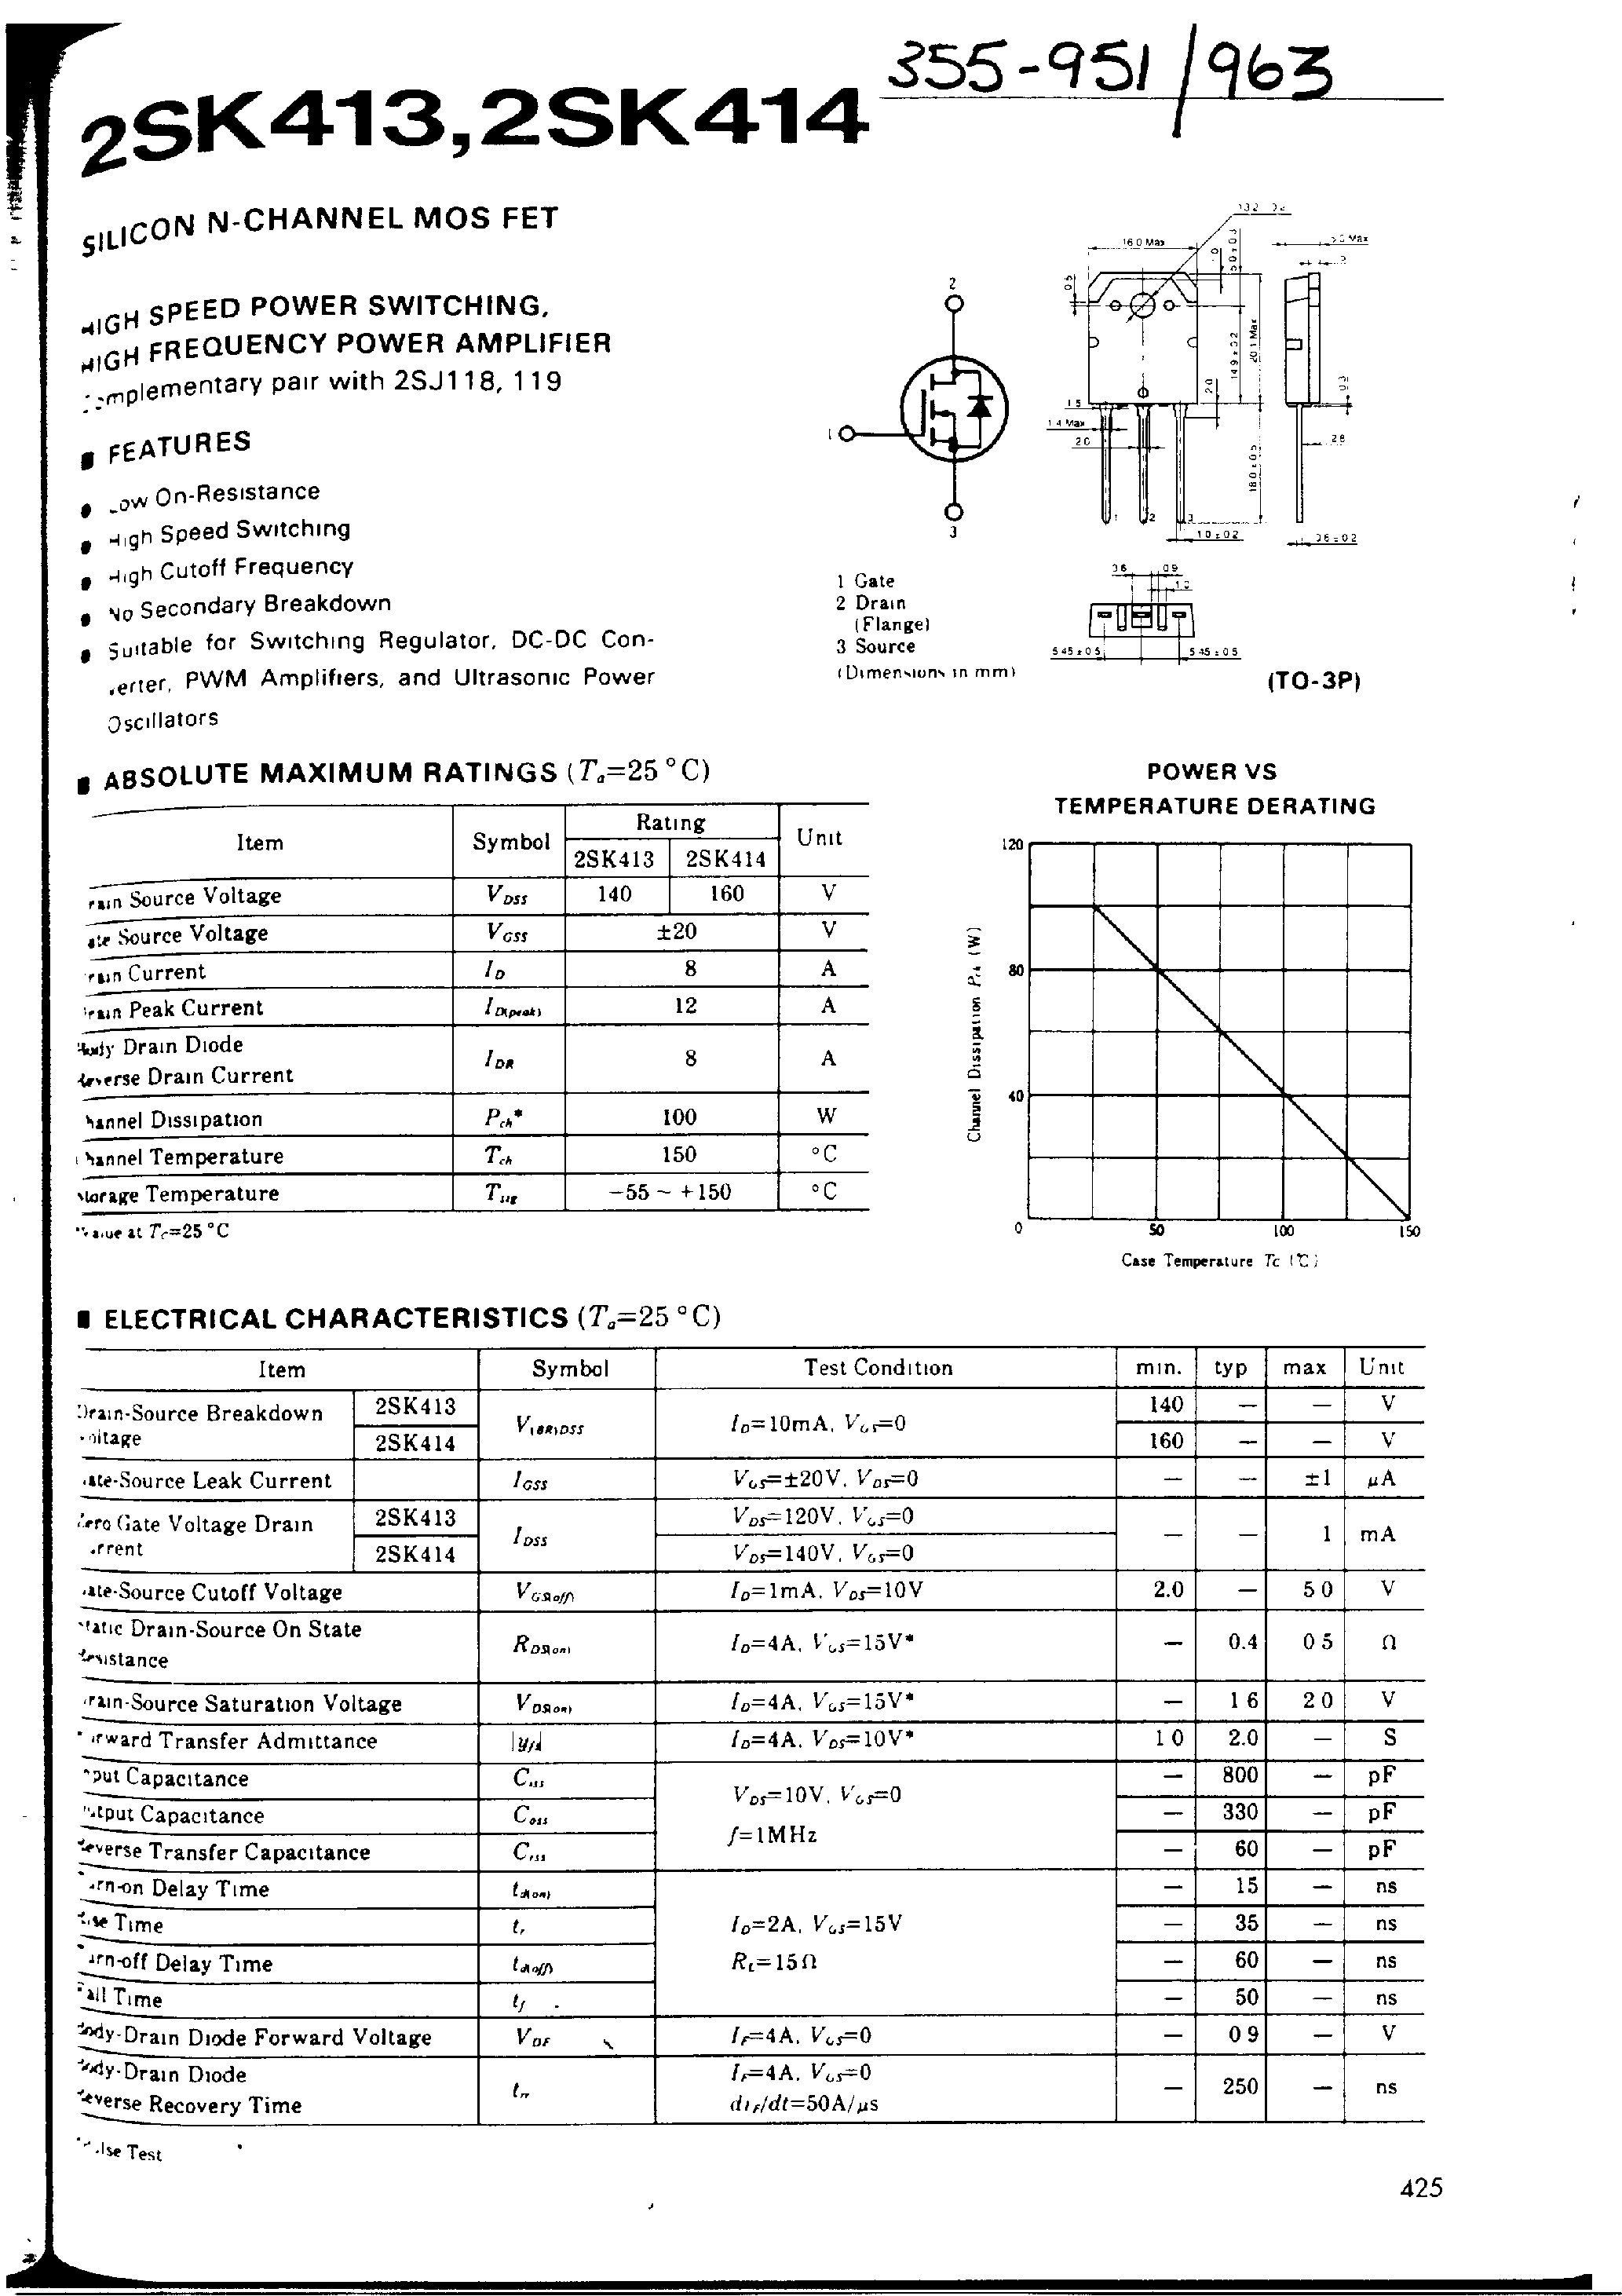 Datasheet 2SK413 - (2SK413 / 2SK414) SILICON N-CHANNEL MOS FET page 1